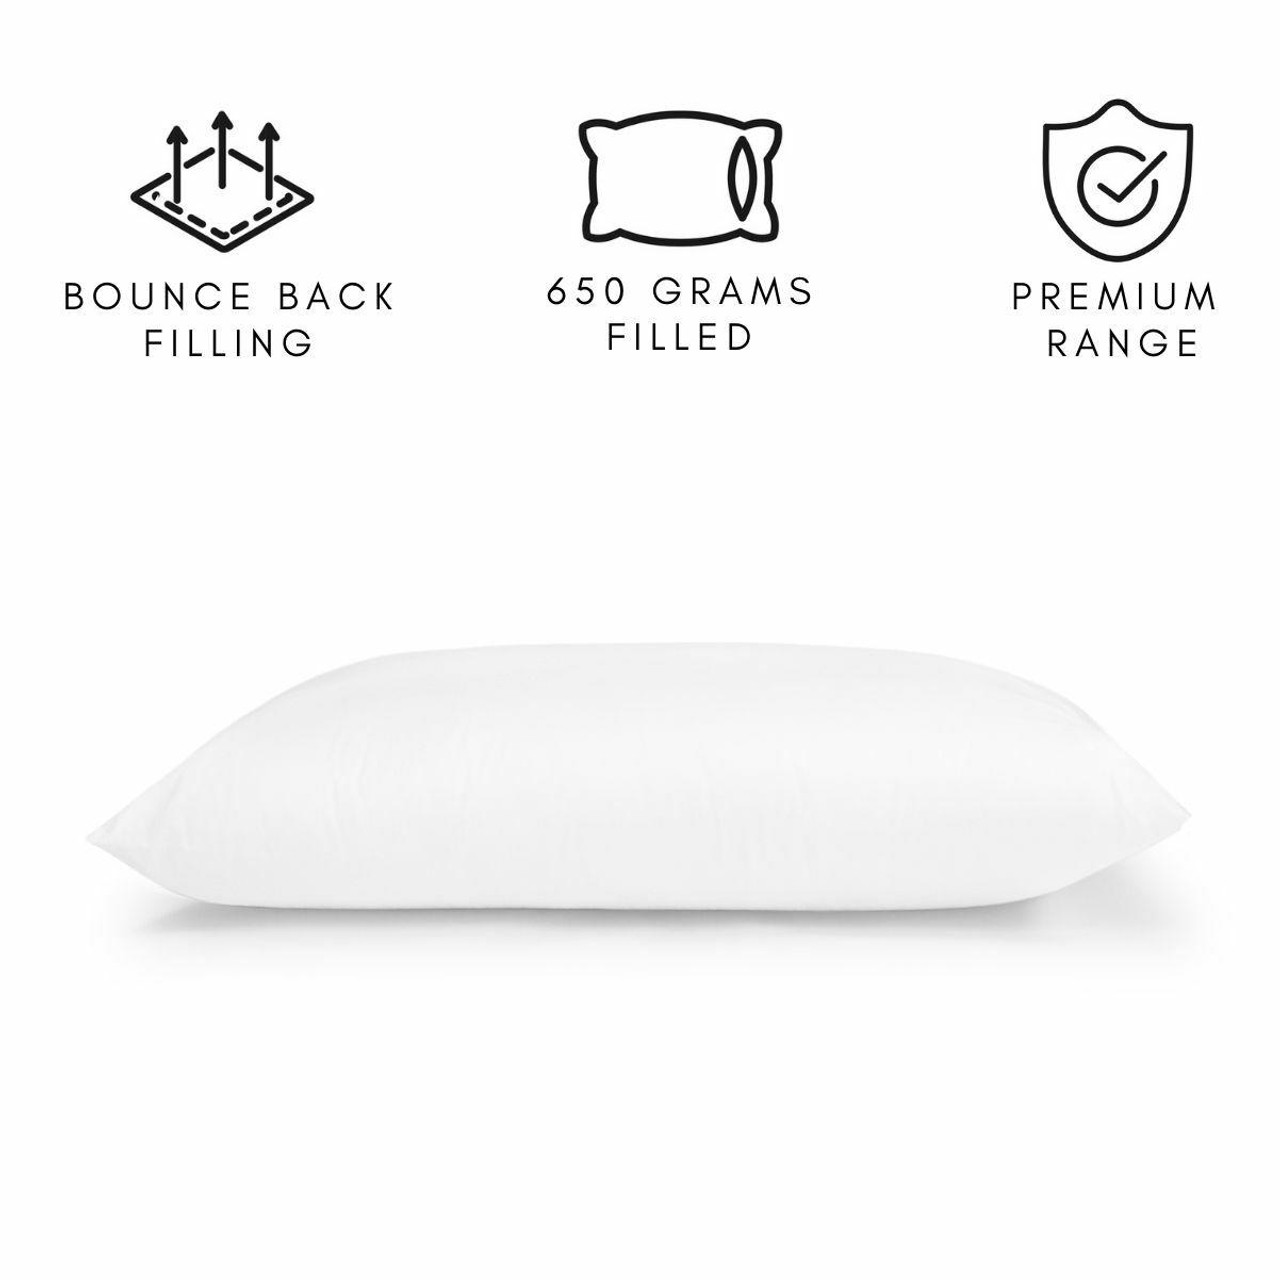 Pack of 2 Bounce Back Pillows Luxury Hollow Fibre Filling Pillow Pair Soft Large 